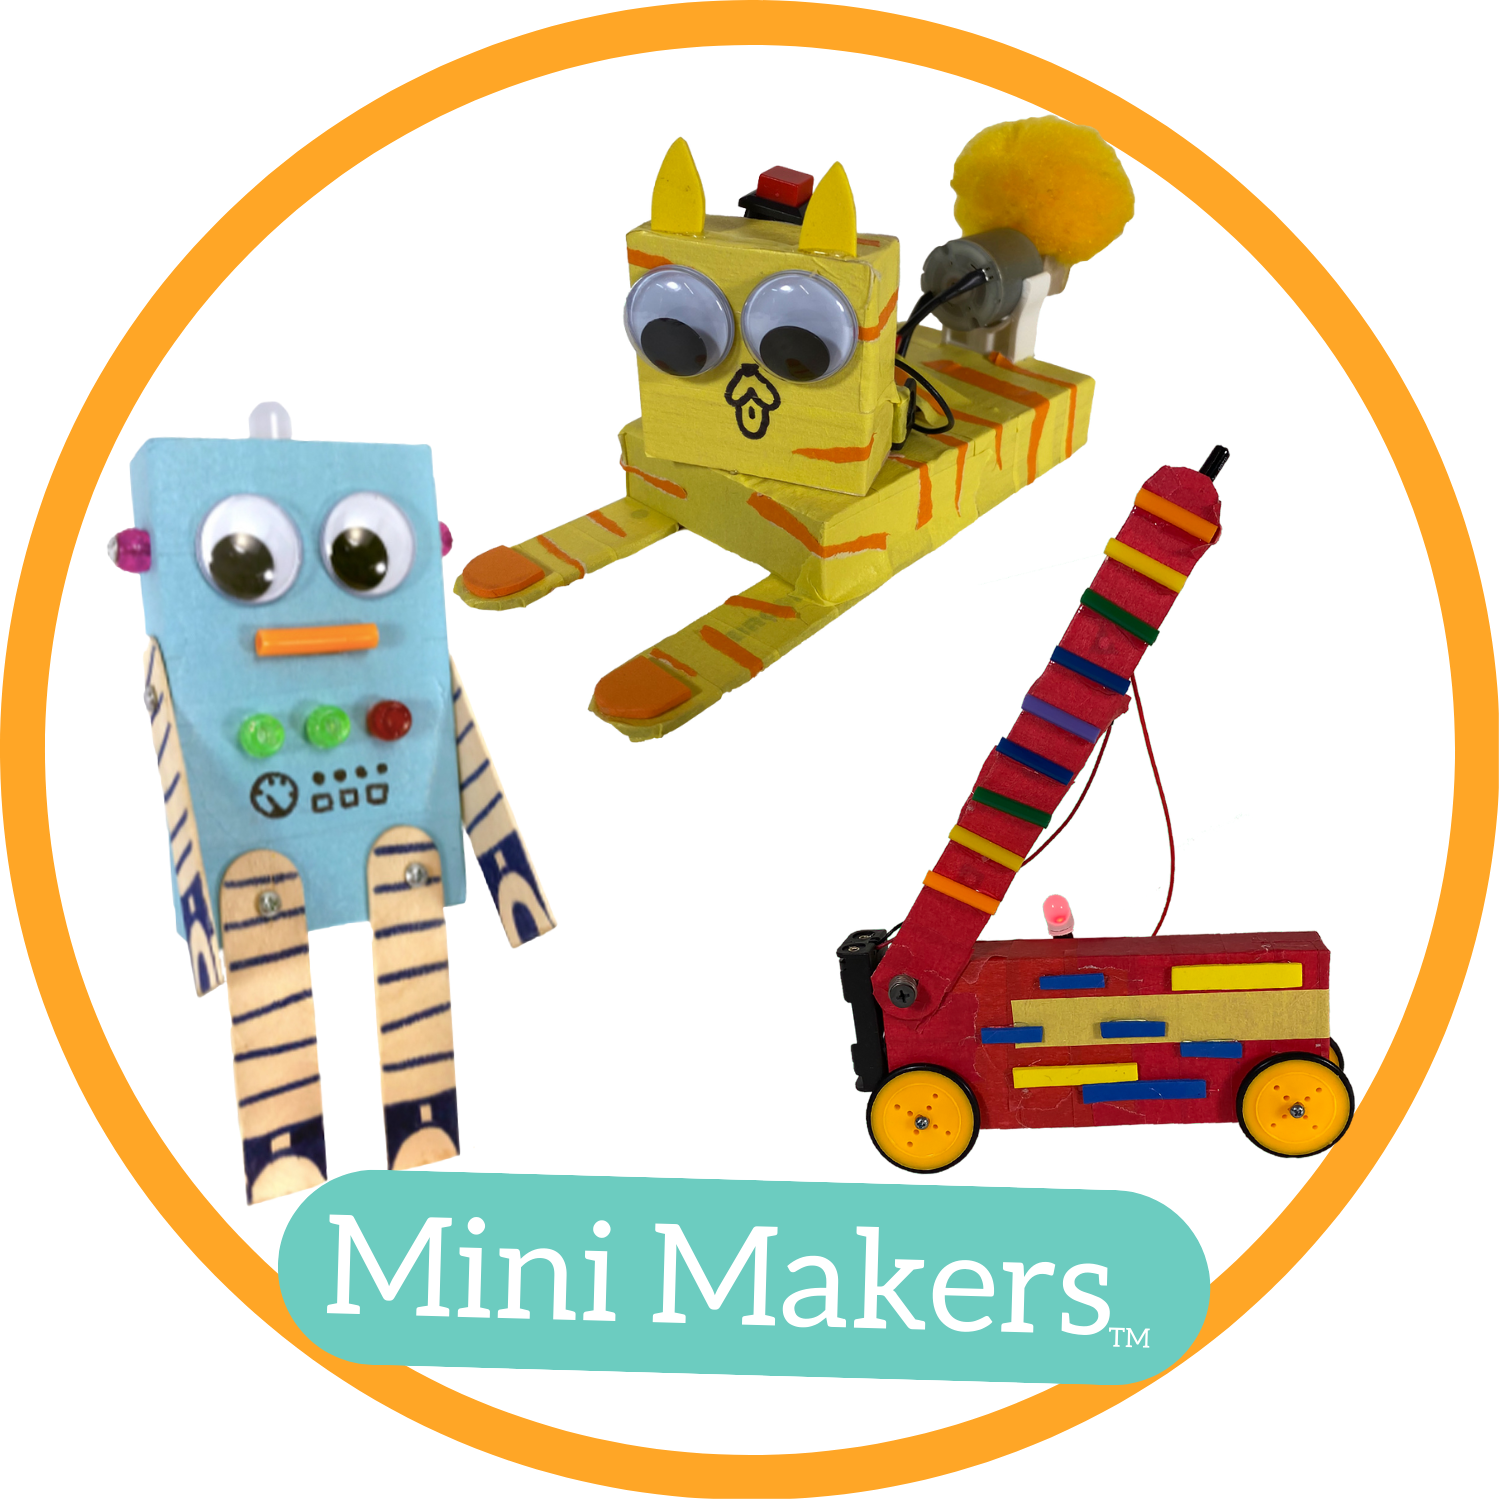 An orange circle with three sample robots in it and the words "Mini Makers" in a teal bubble